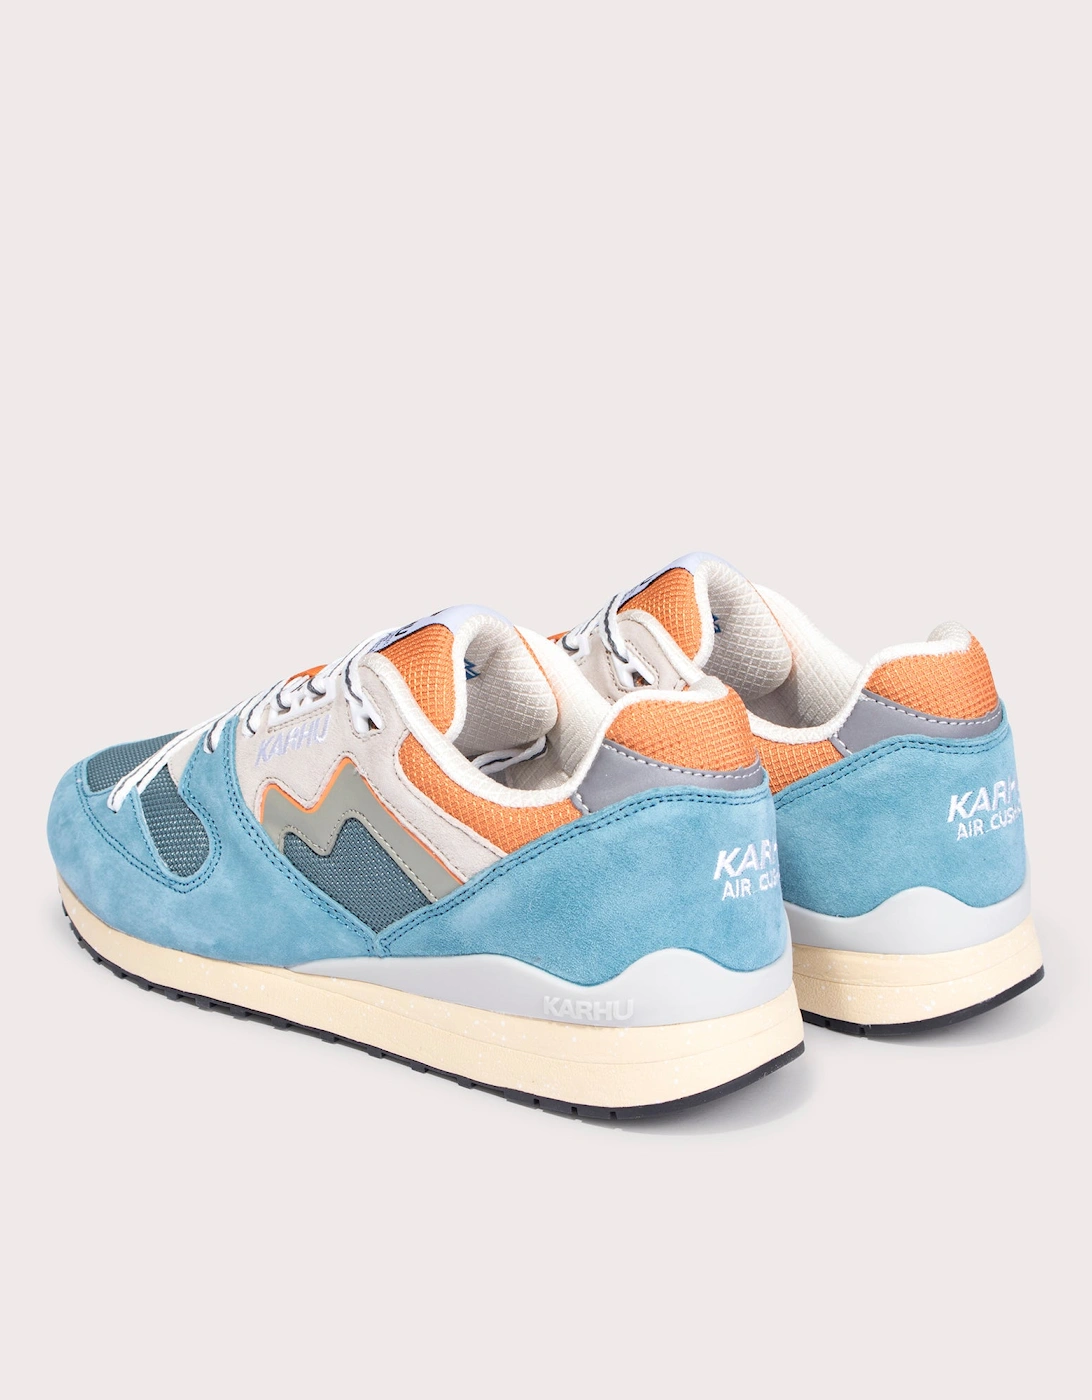 Synchron Classic Trainers